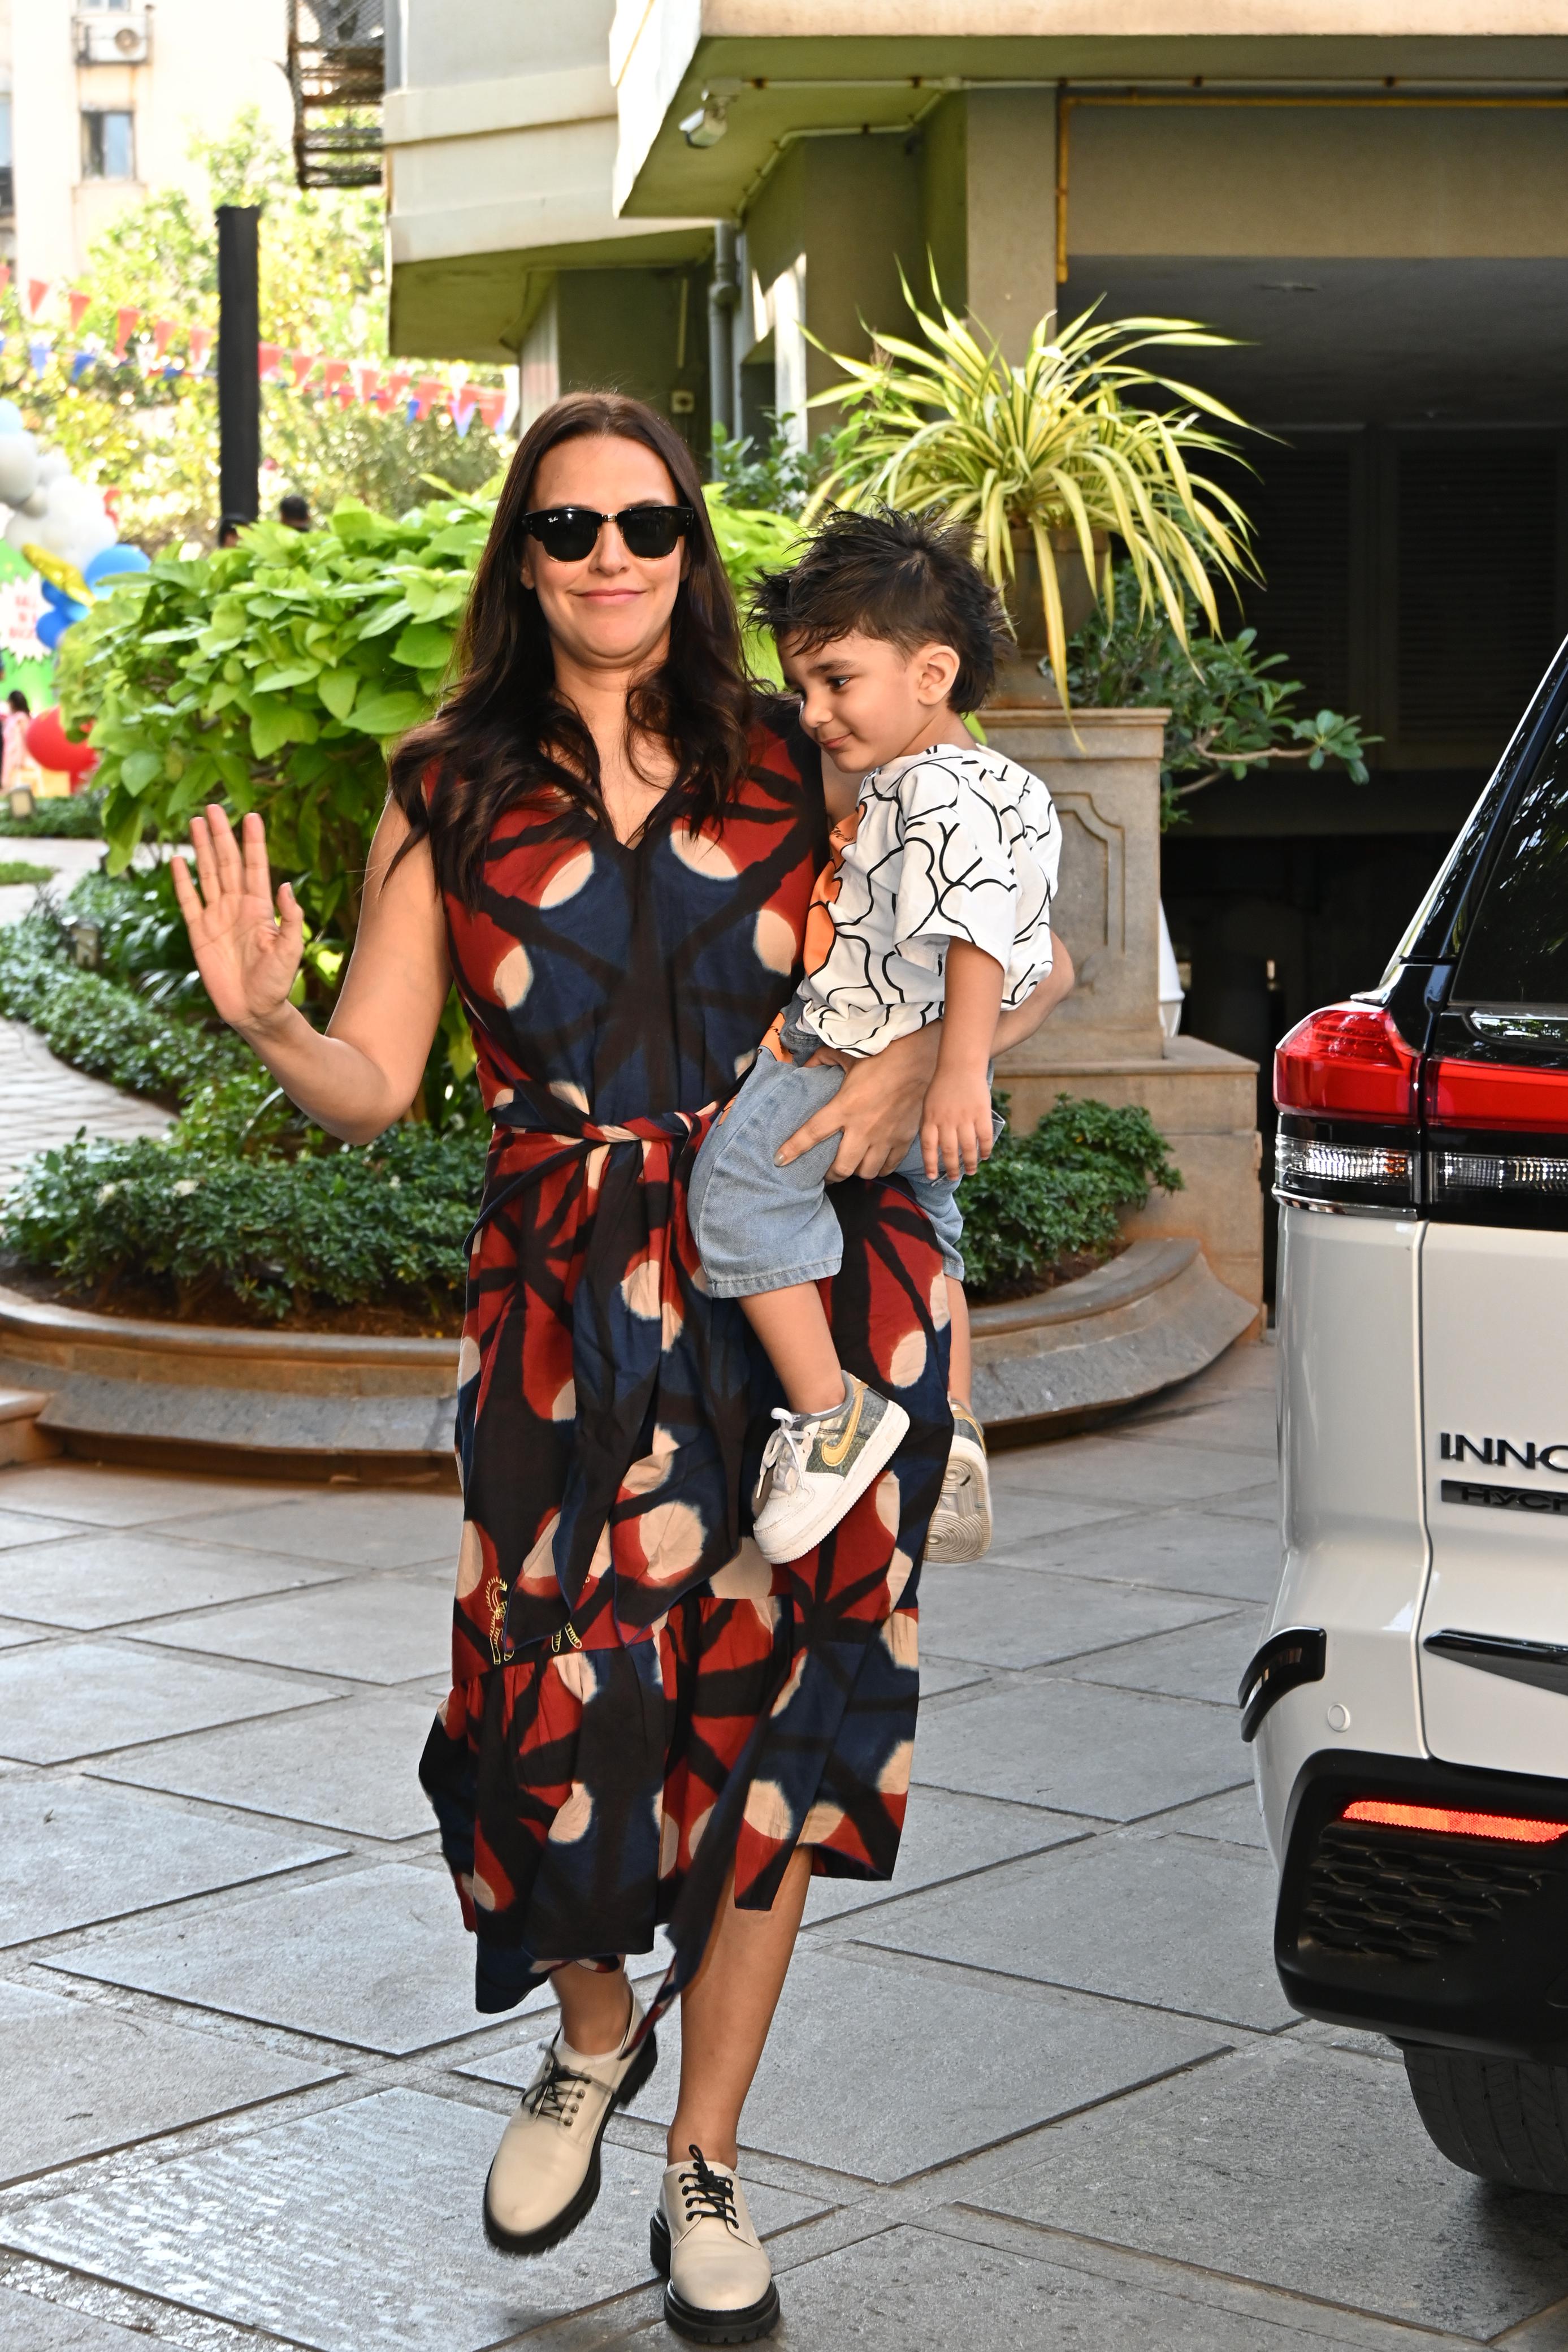 Actress Neha Dhupia also attended Jeh's birthday bash with her son Guriq